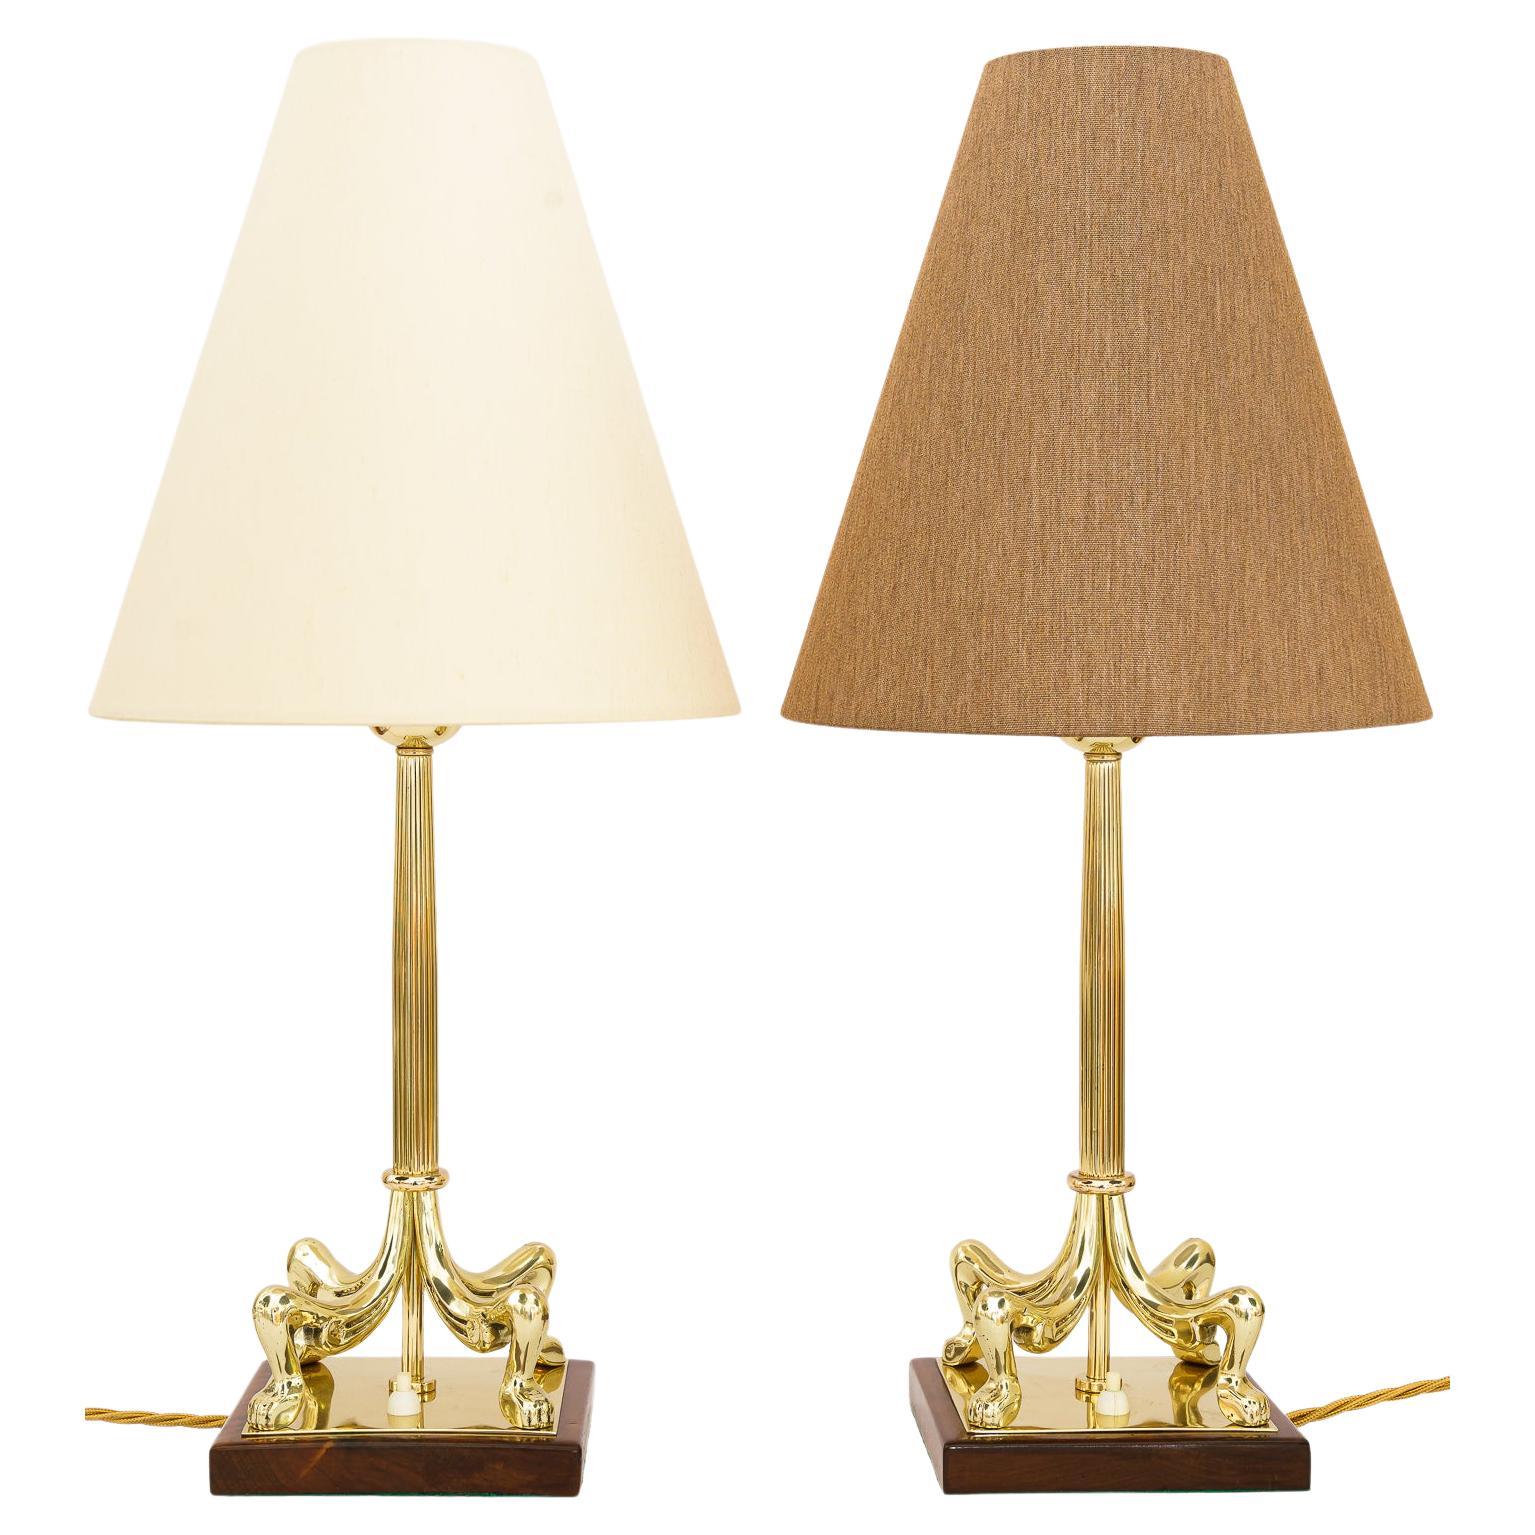 2 Big Art Deco Table Lamps with Fabric Shades Vienna Around 1920s